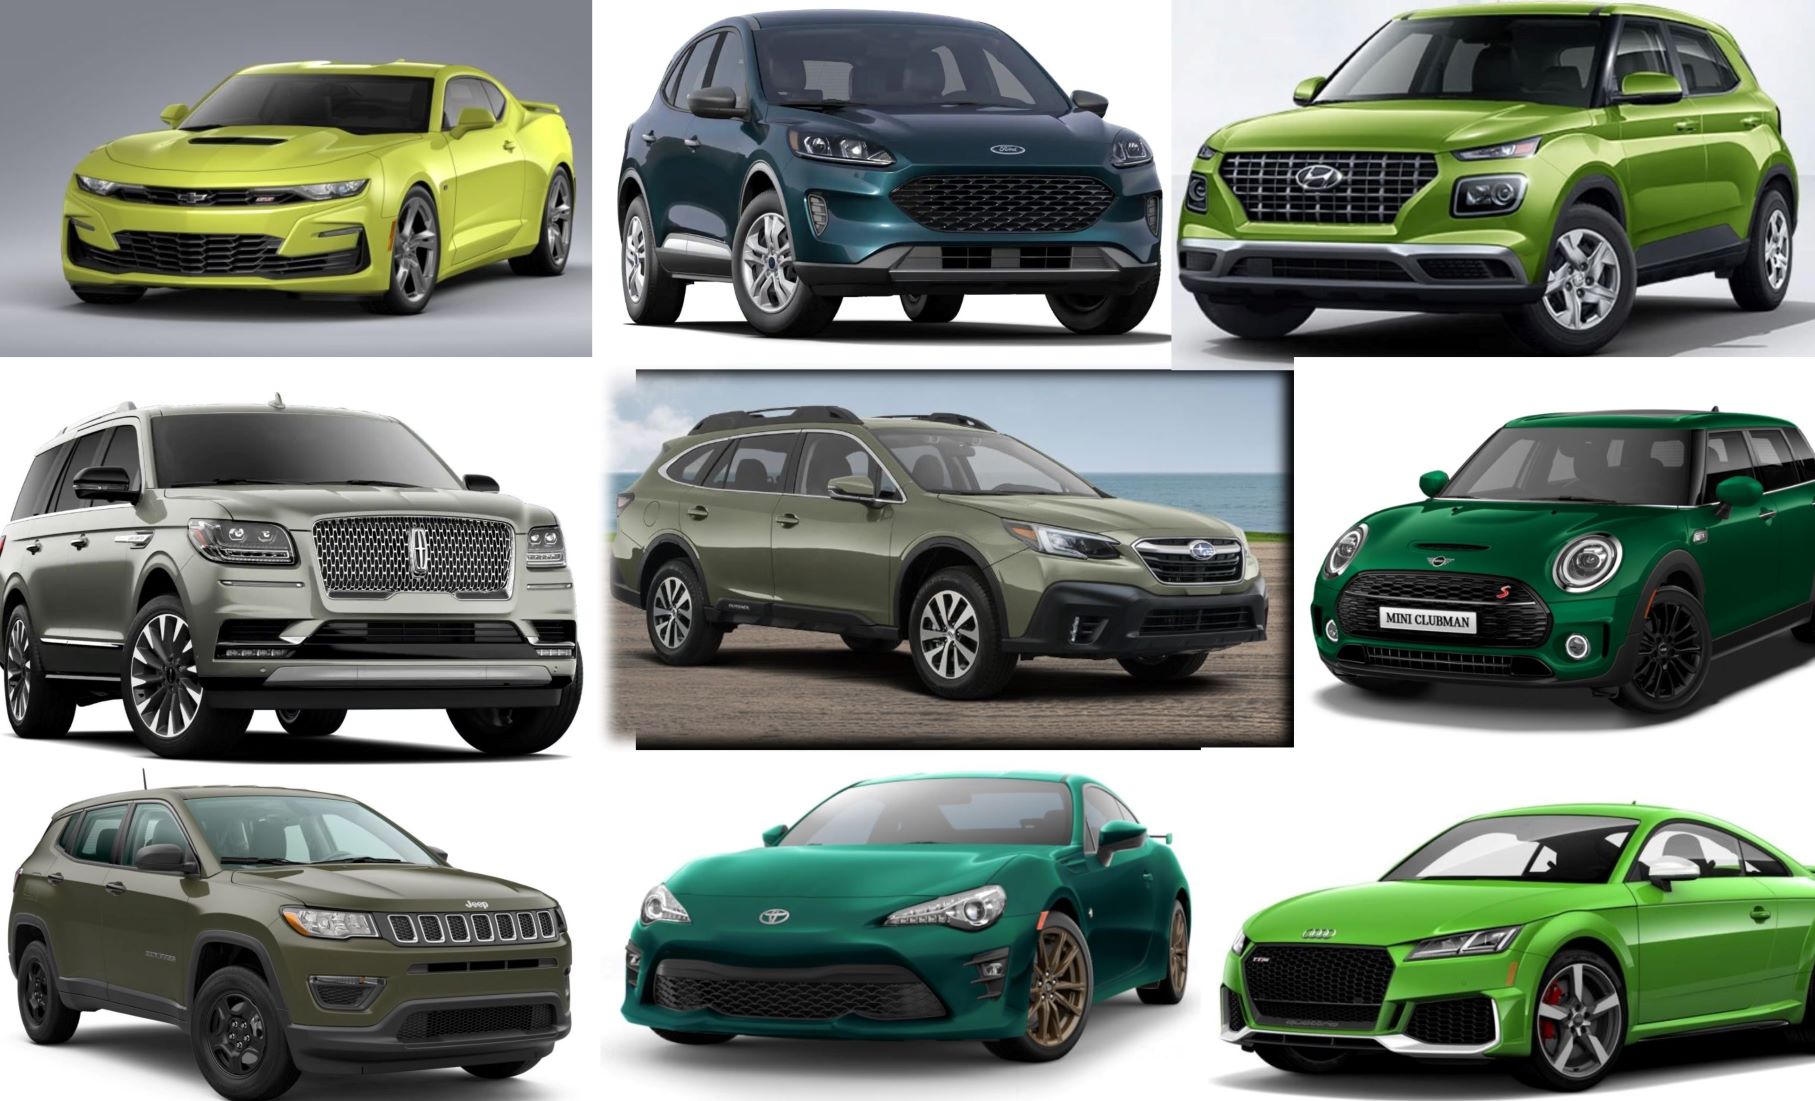 Unusual Car Colors: 2020 Models Available in Green - The News Wheel